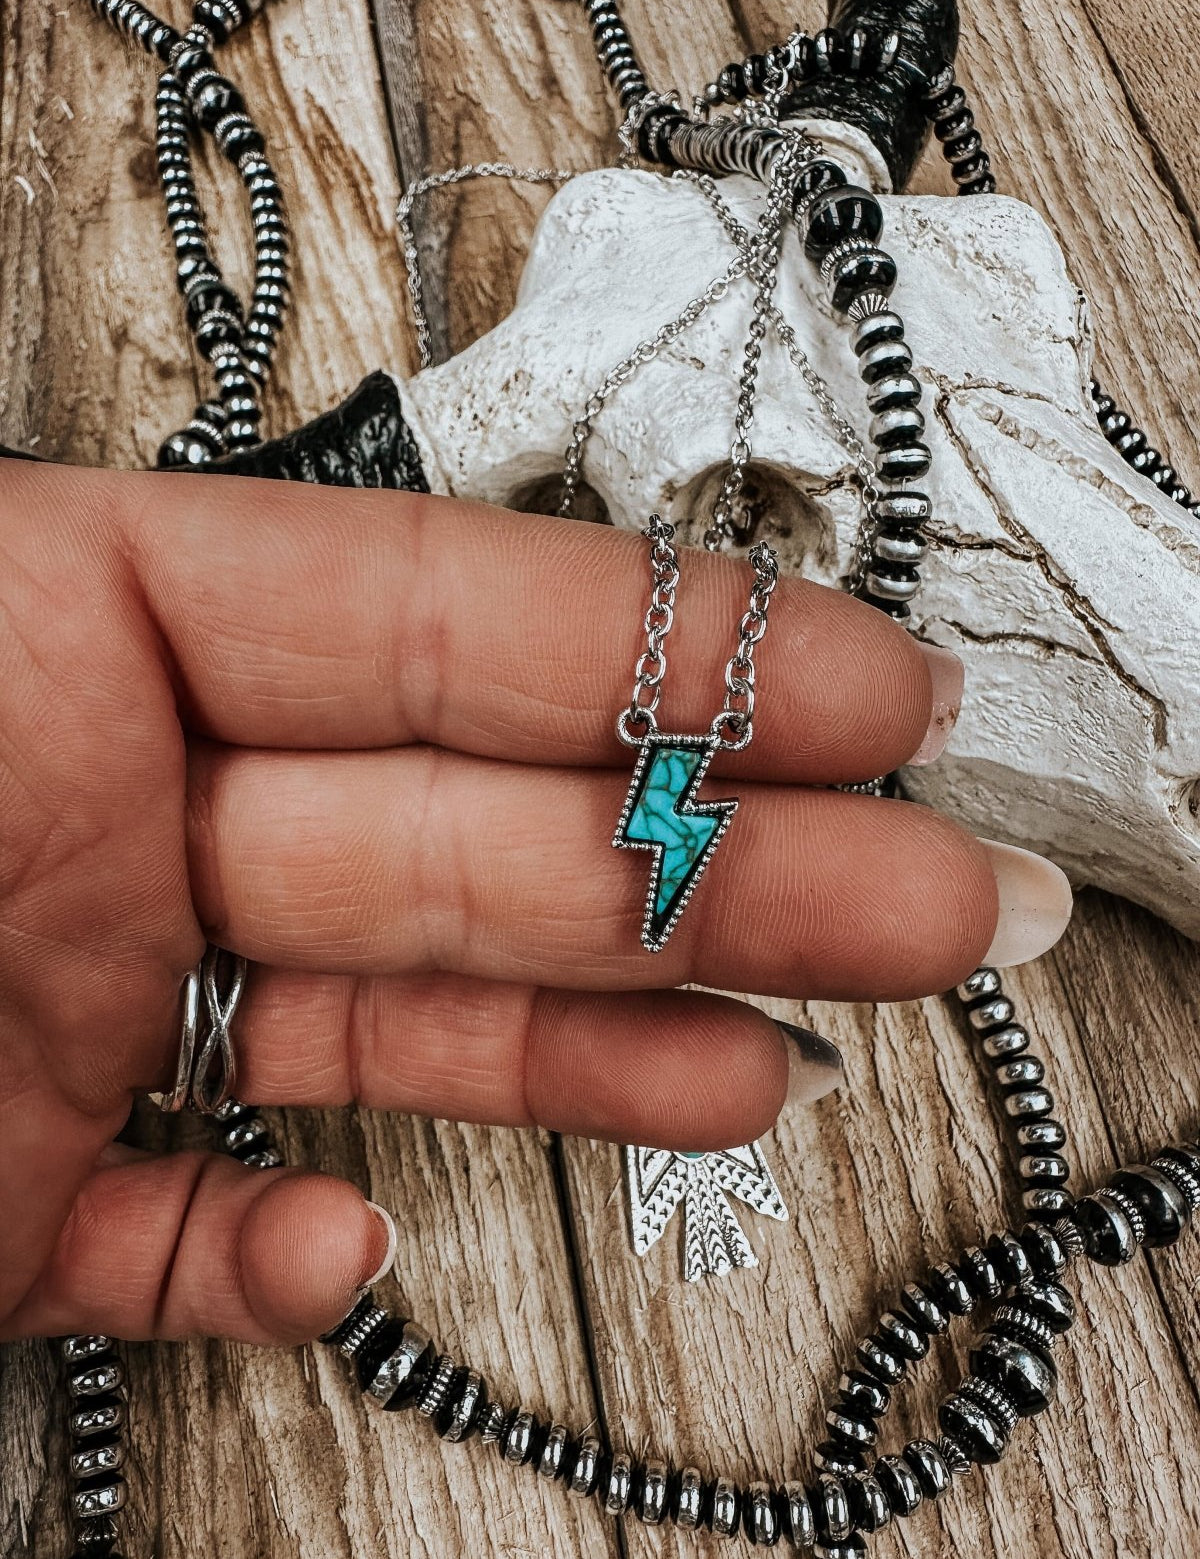 Small Bolt Pendant - necklace